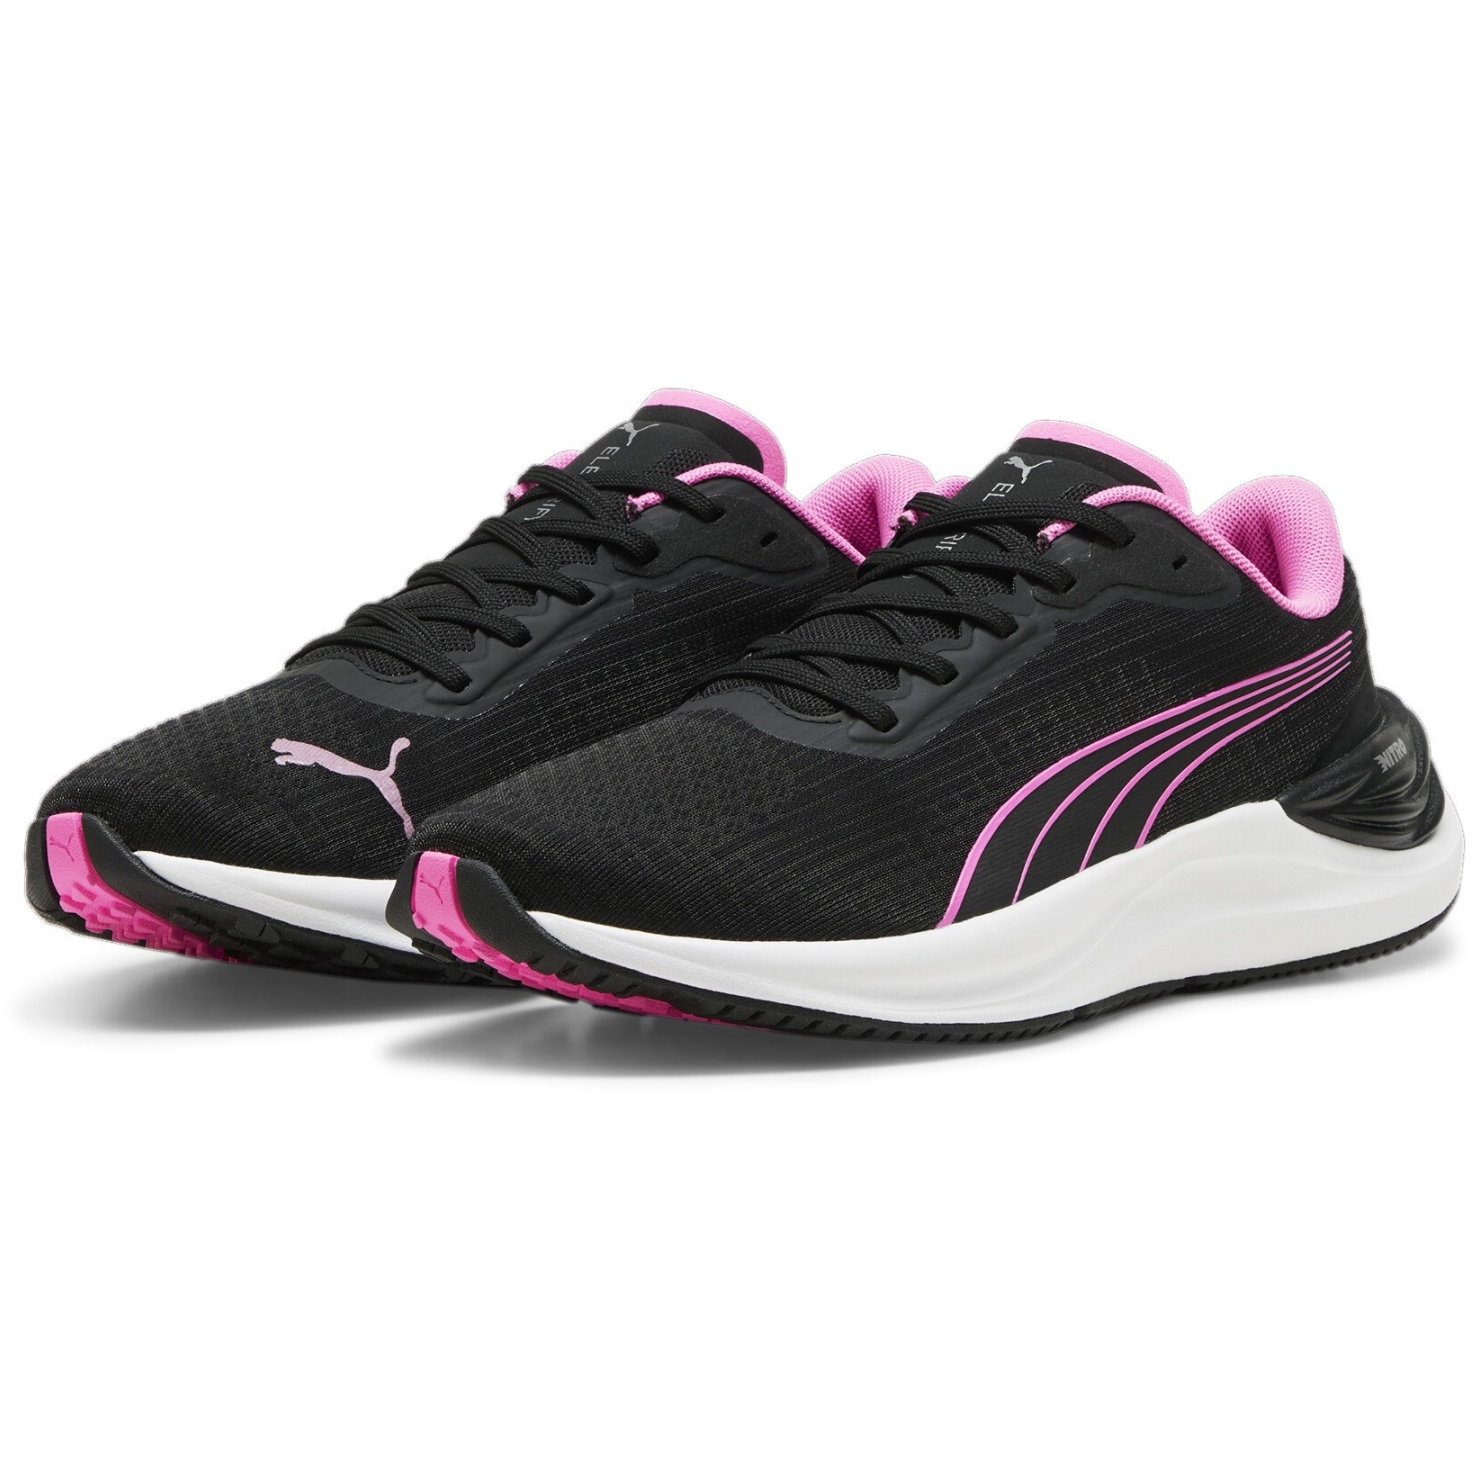 Picture of Puma Electrify Nitro 3 Running Shoes Women - Puma Black-Poison Pink